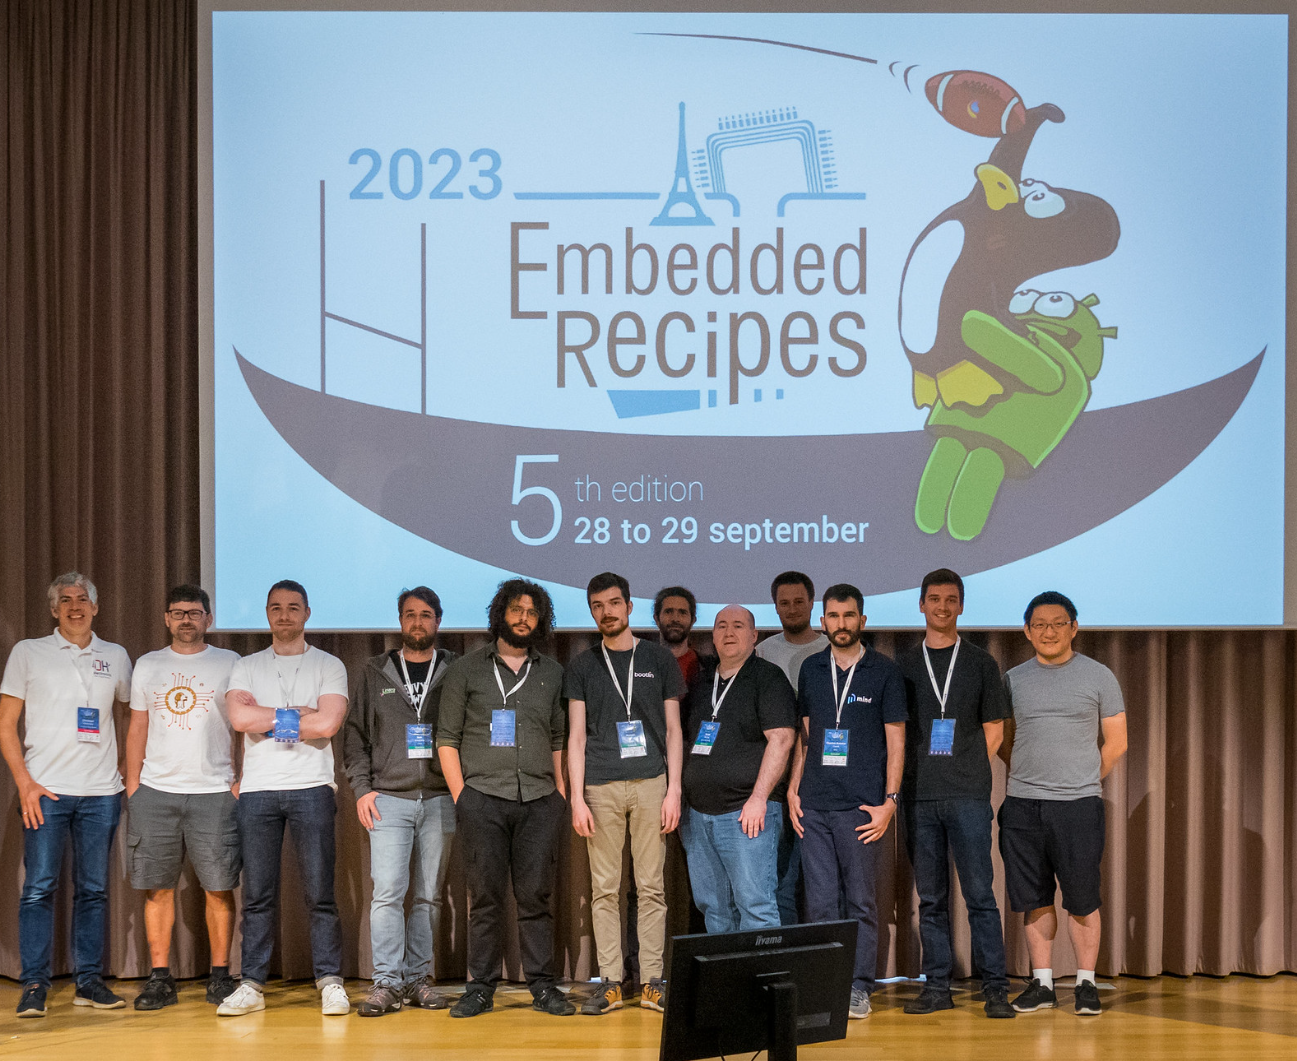 All the Embedded Recipes speakers on stage